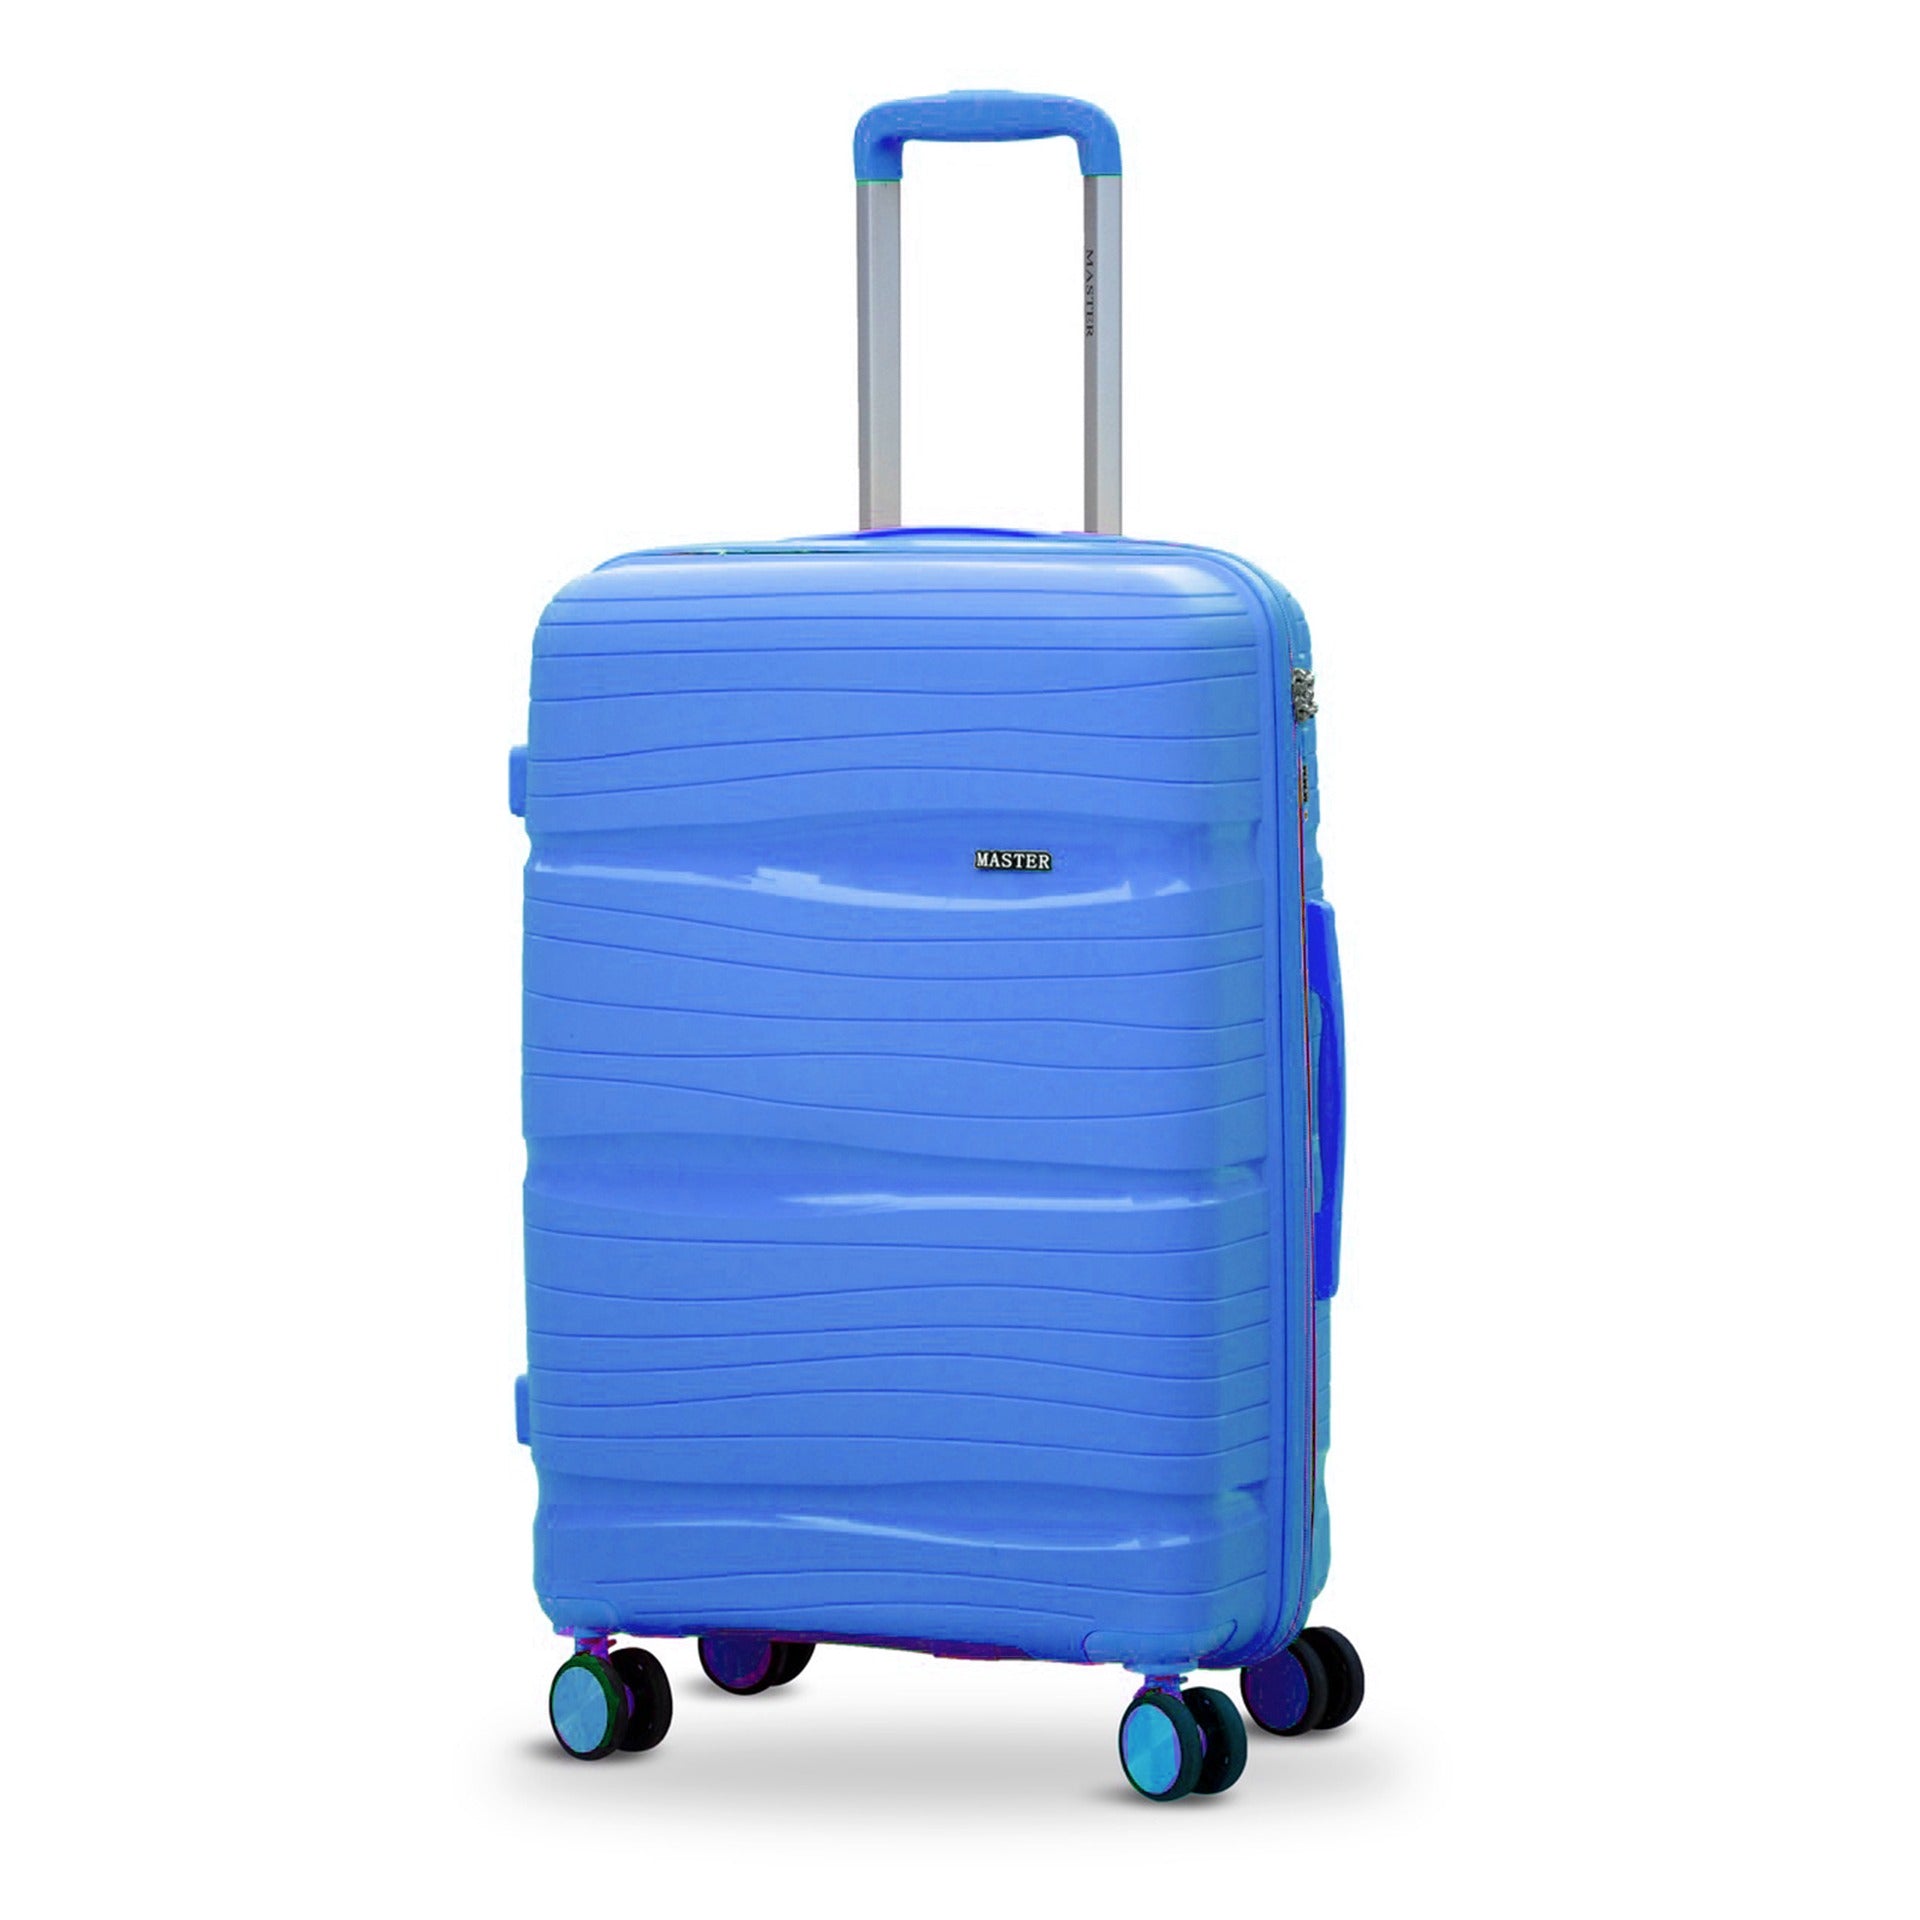 20" Sky Blue Colour Royal PP Luggage Lightweight Hard Case Carry On Trolley Bag with Double Spinner Wheel Zaappy.com